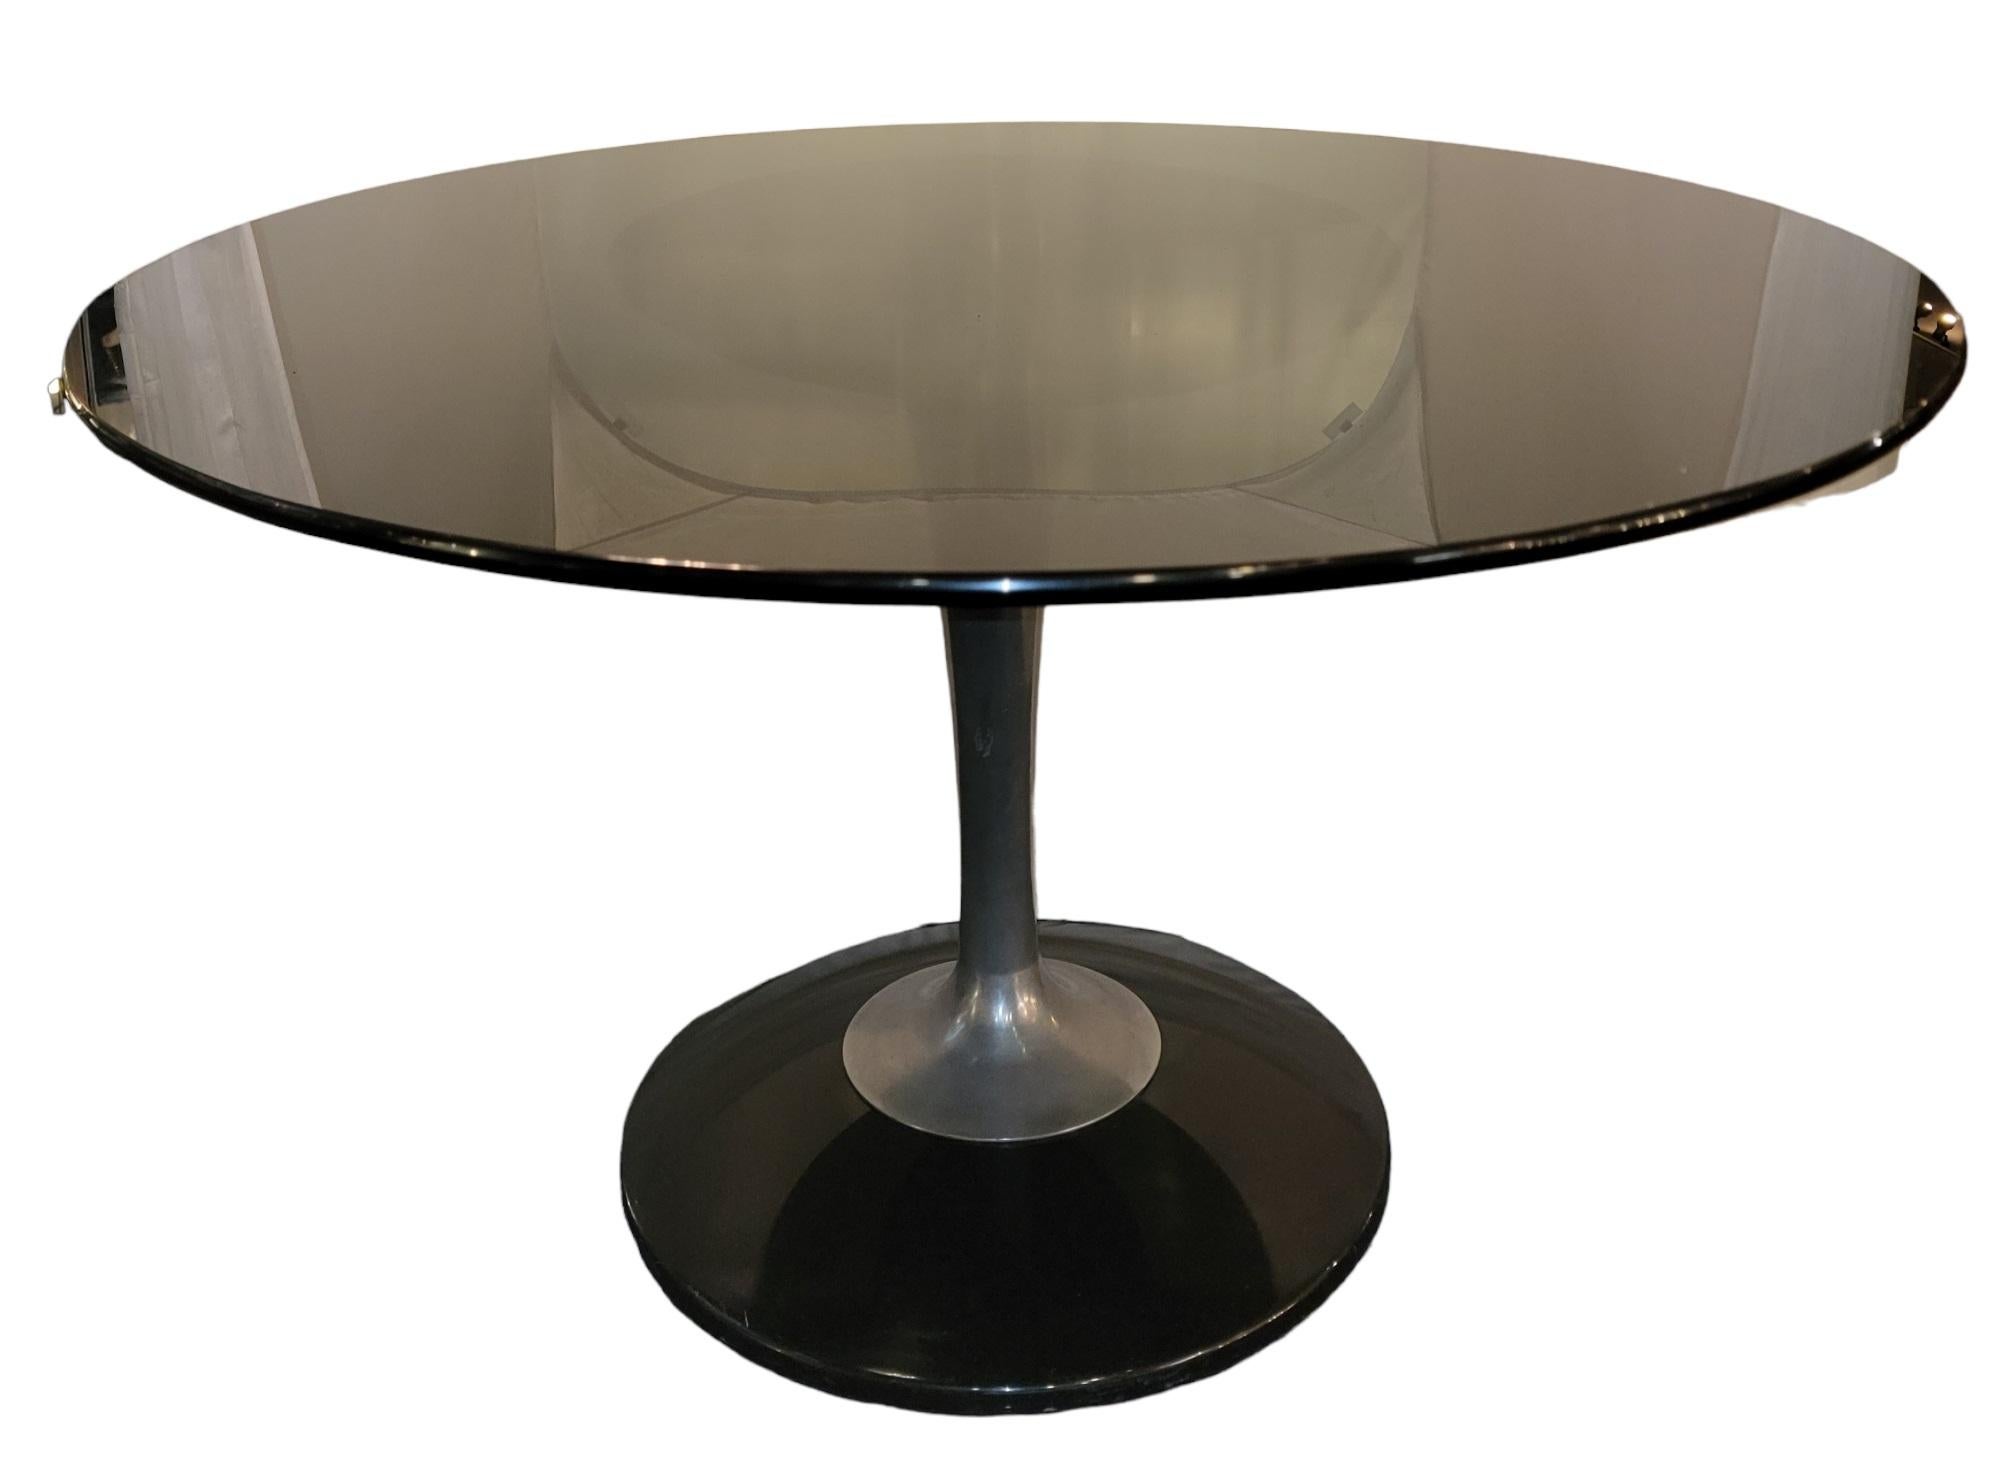 American 1980s Midcentury Glass and Metal Conference Table For Sale